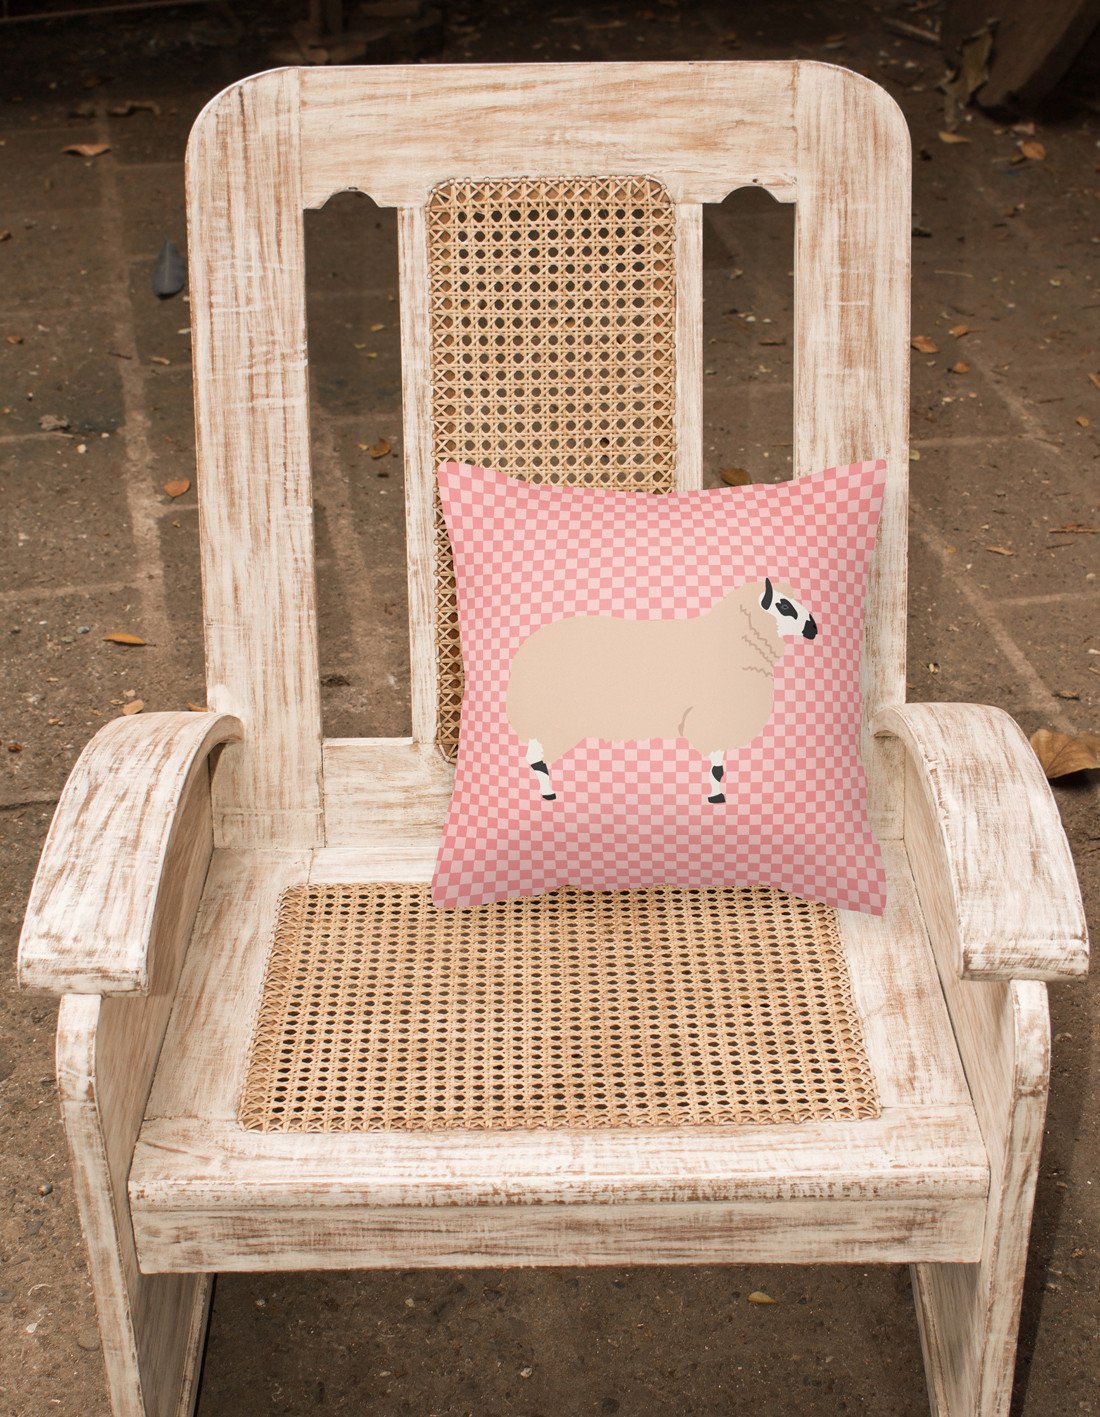 Kerry Hill Sheep Pink Check Fabric Decorative Pillow BB7979PW1818 by Caroline's Treasures